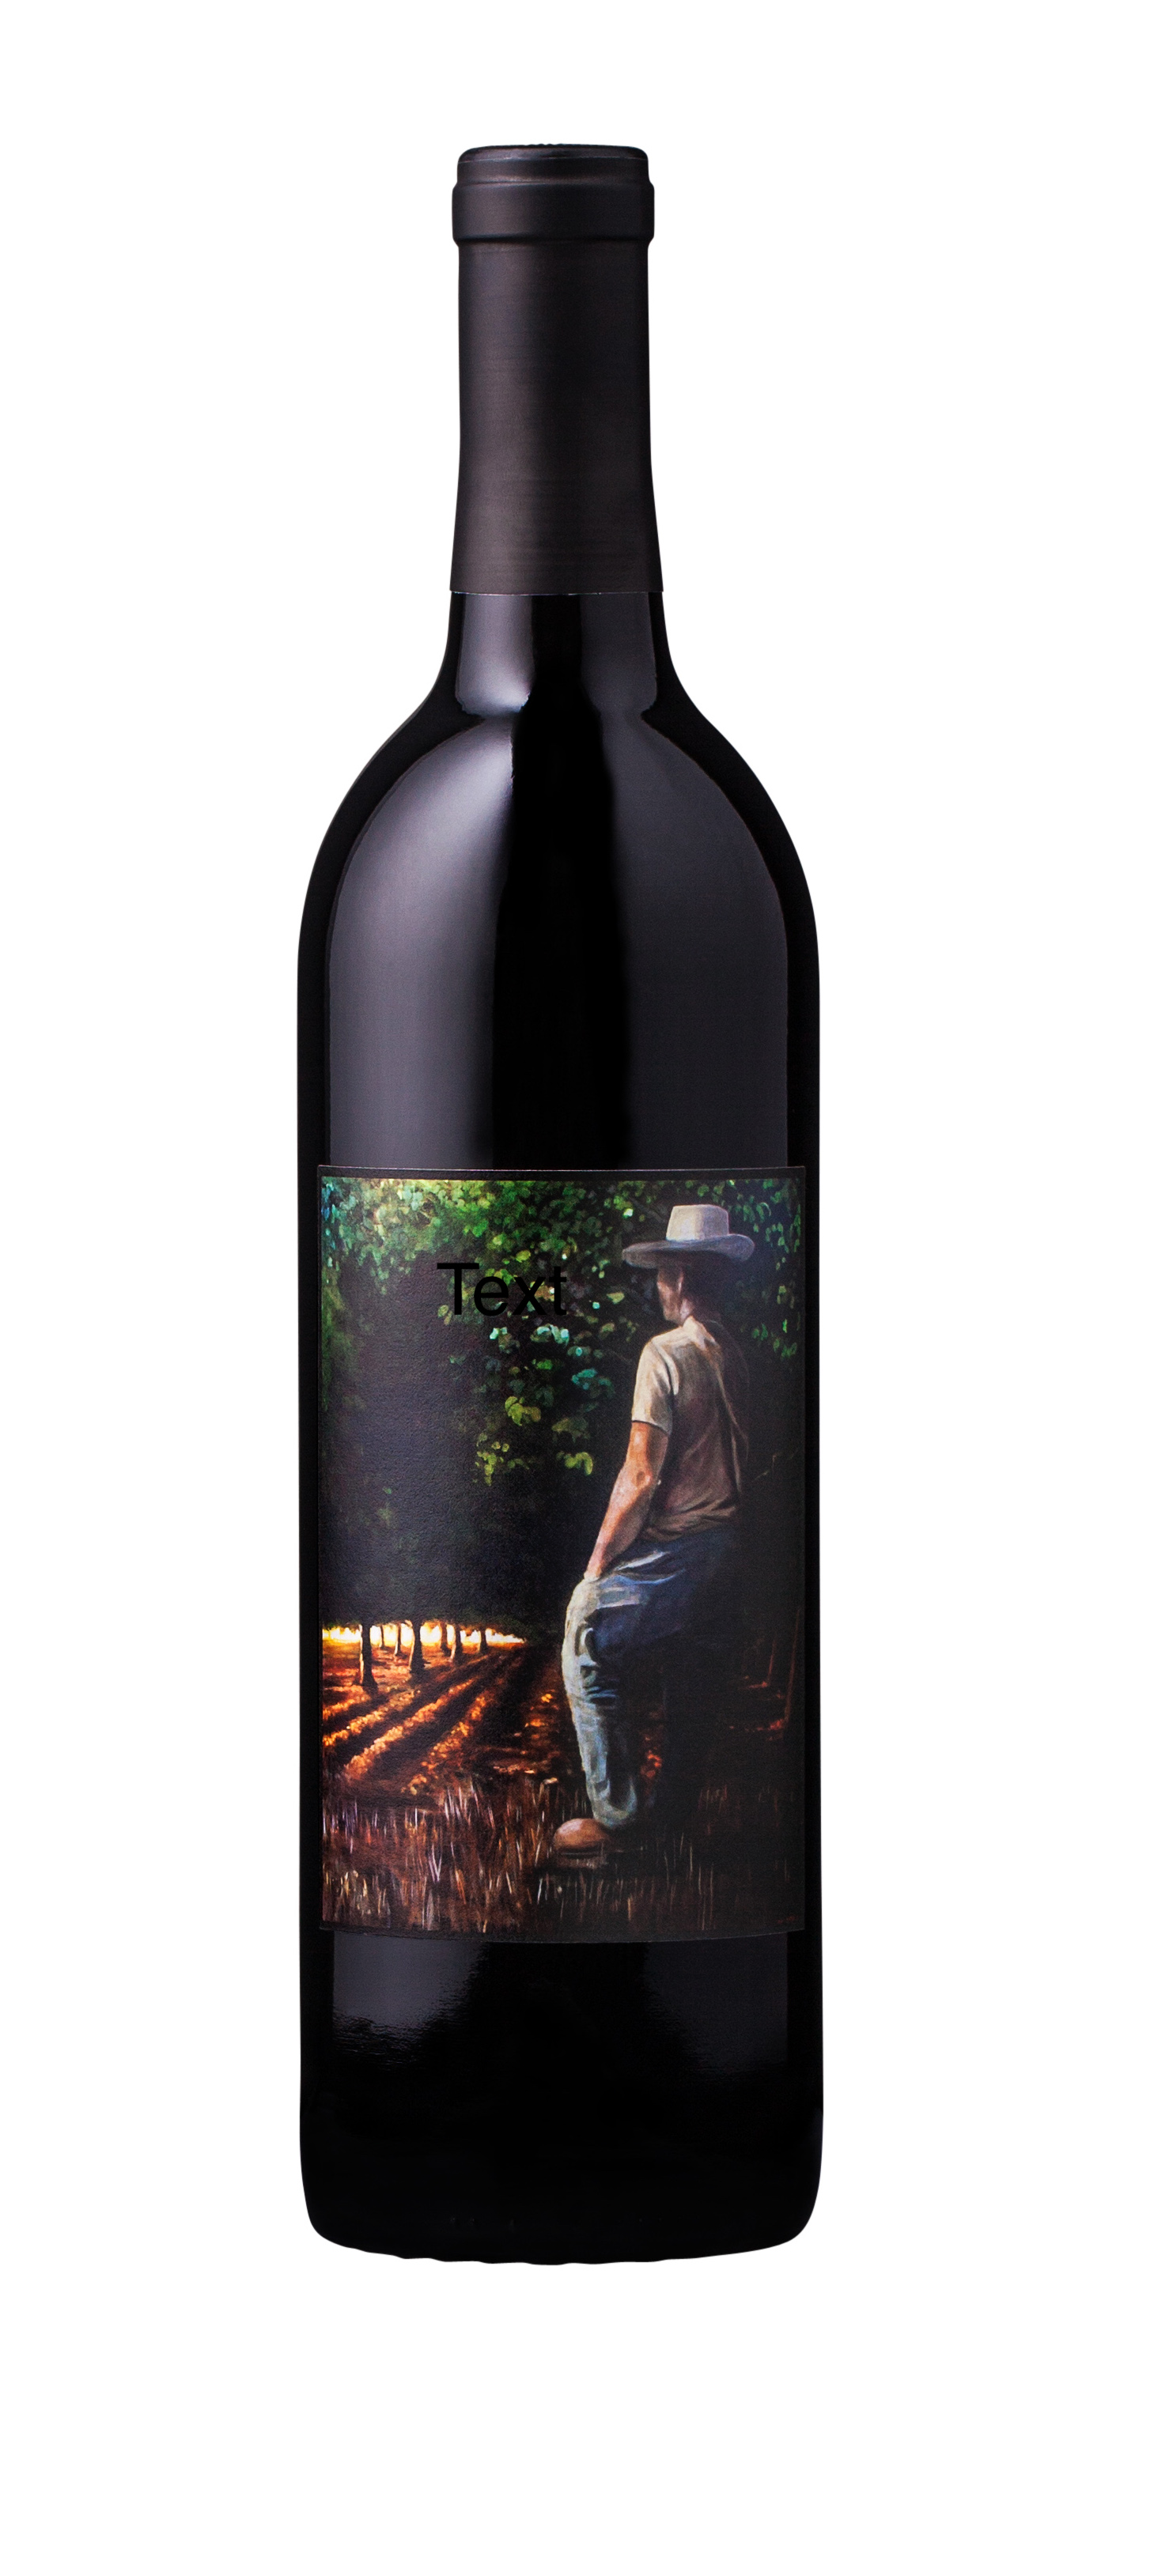 Product Image for Trahan 2013 "Grandpa's" Cabernet Sauvignon Rutherford